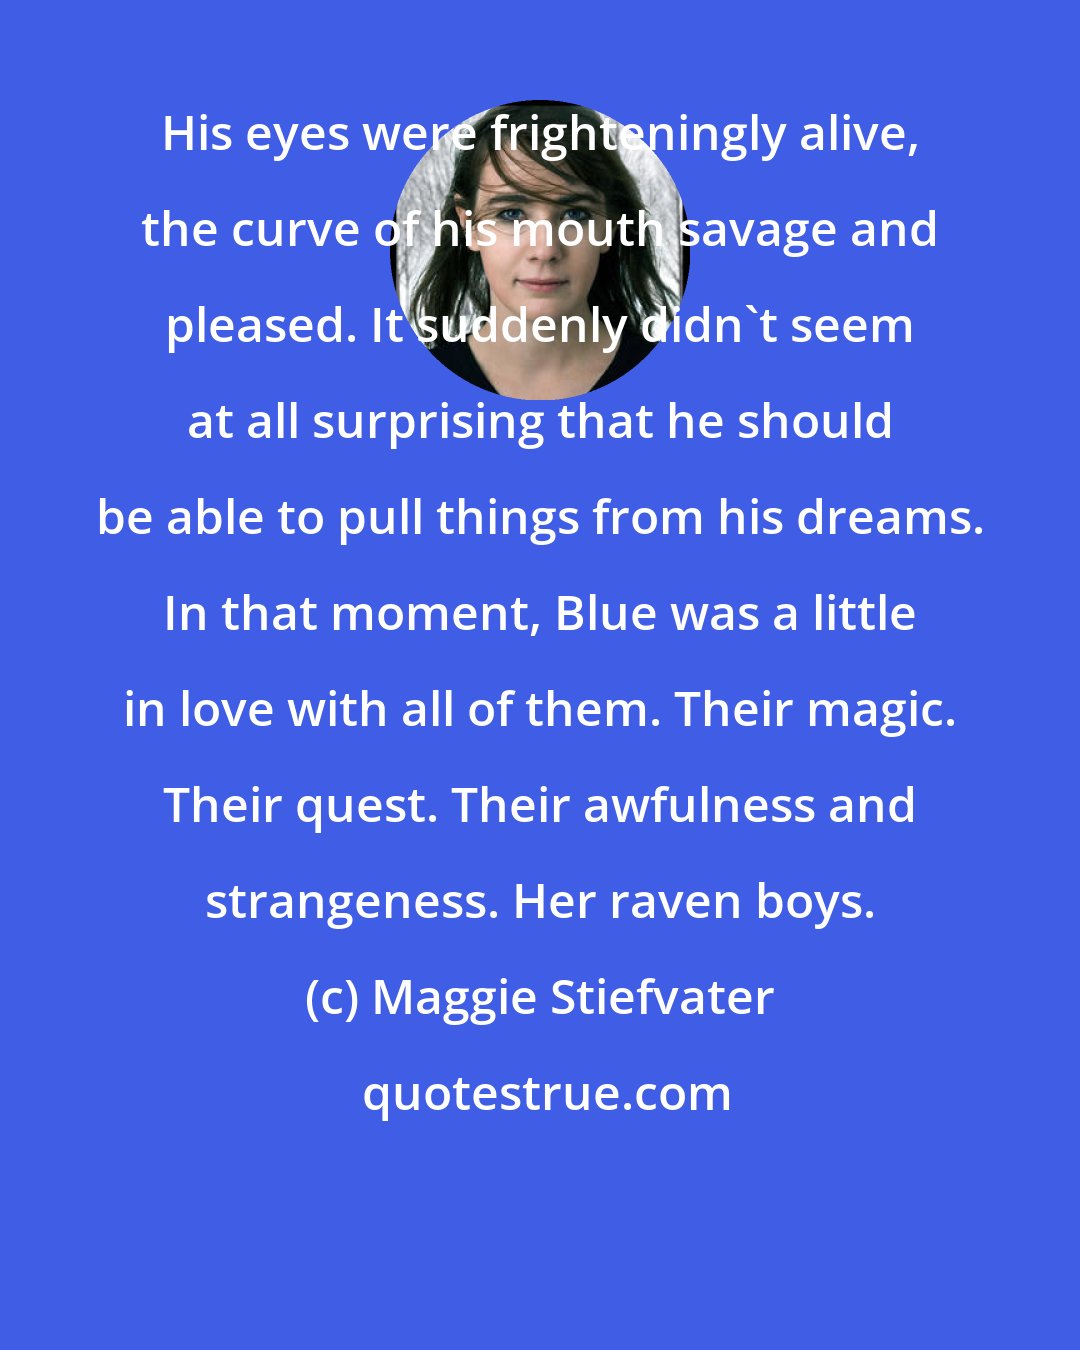 Maggie Stiefvater: His eyes were frighteningly alive, the curve of his mouth savage and pleased. It suddenly didn't seem at all surprising that he should be able to pull things from his dreams. In that moment, Blue was a little in love with all of them. Their magic. Their quest. Their awfulness and strangeness. Her raven boys.